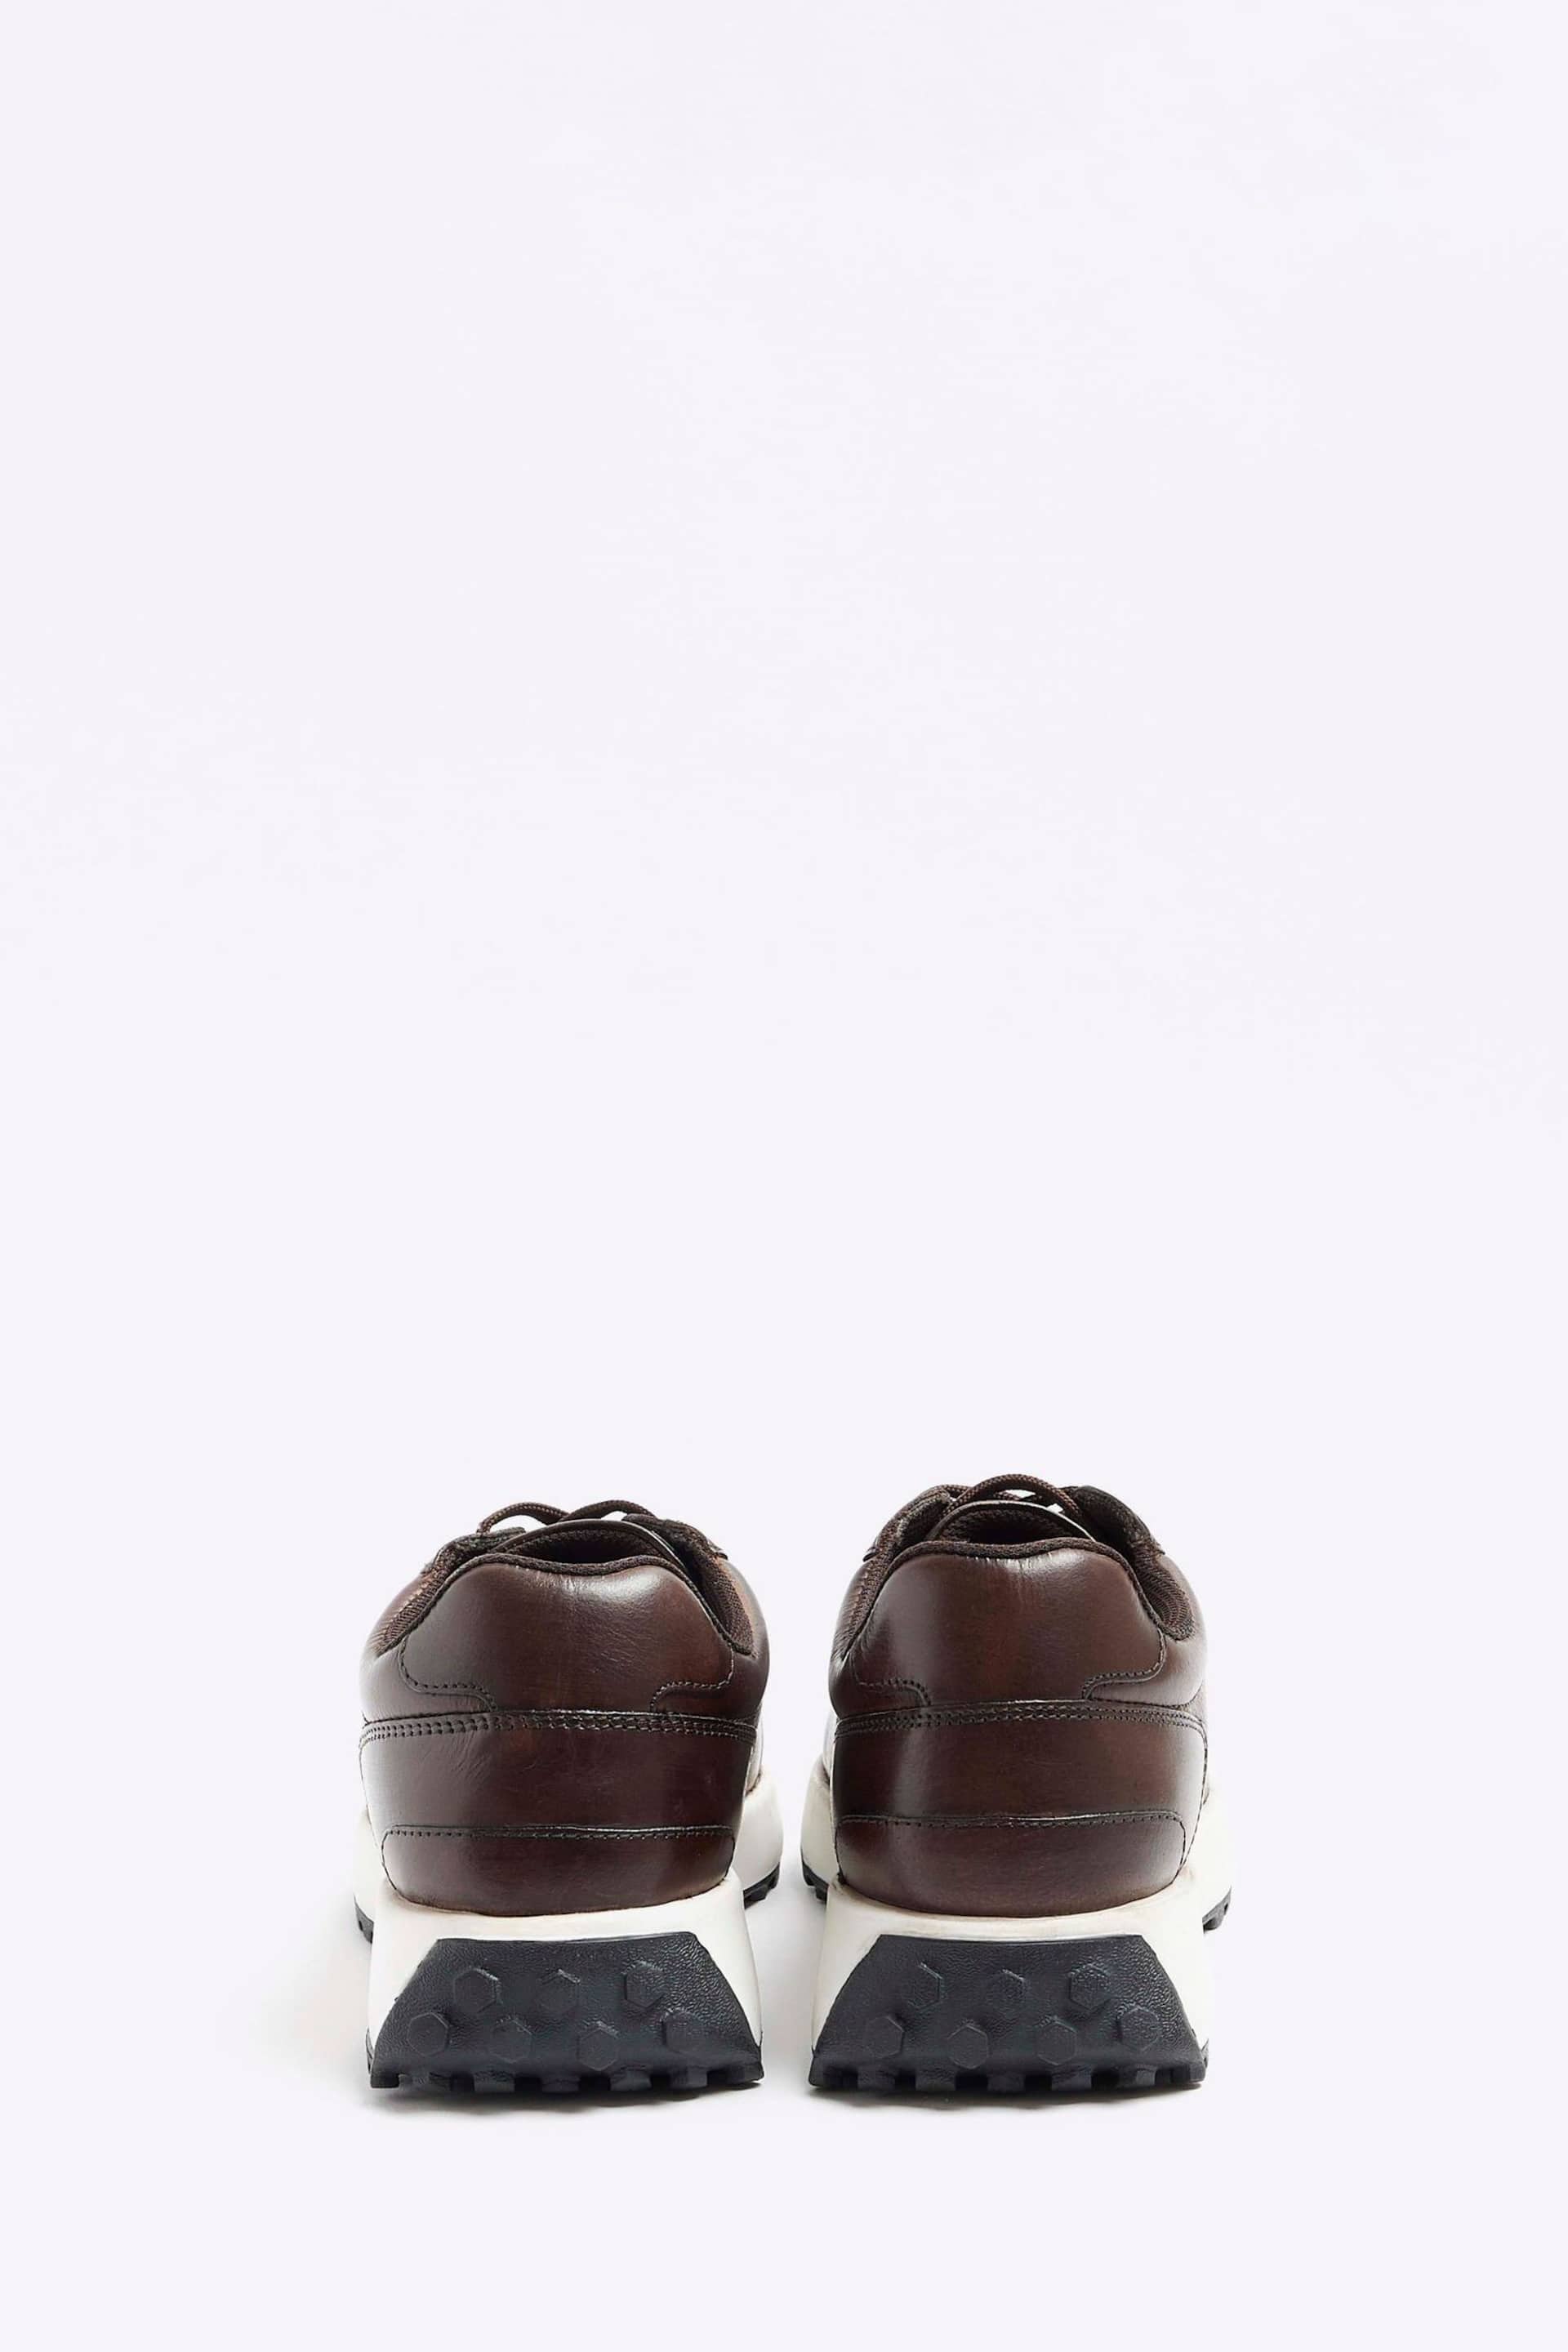 River Island Brown Polished Sneaker Trainers - Image 3 of 3